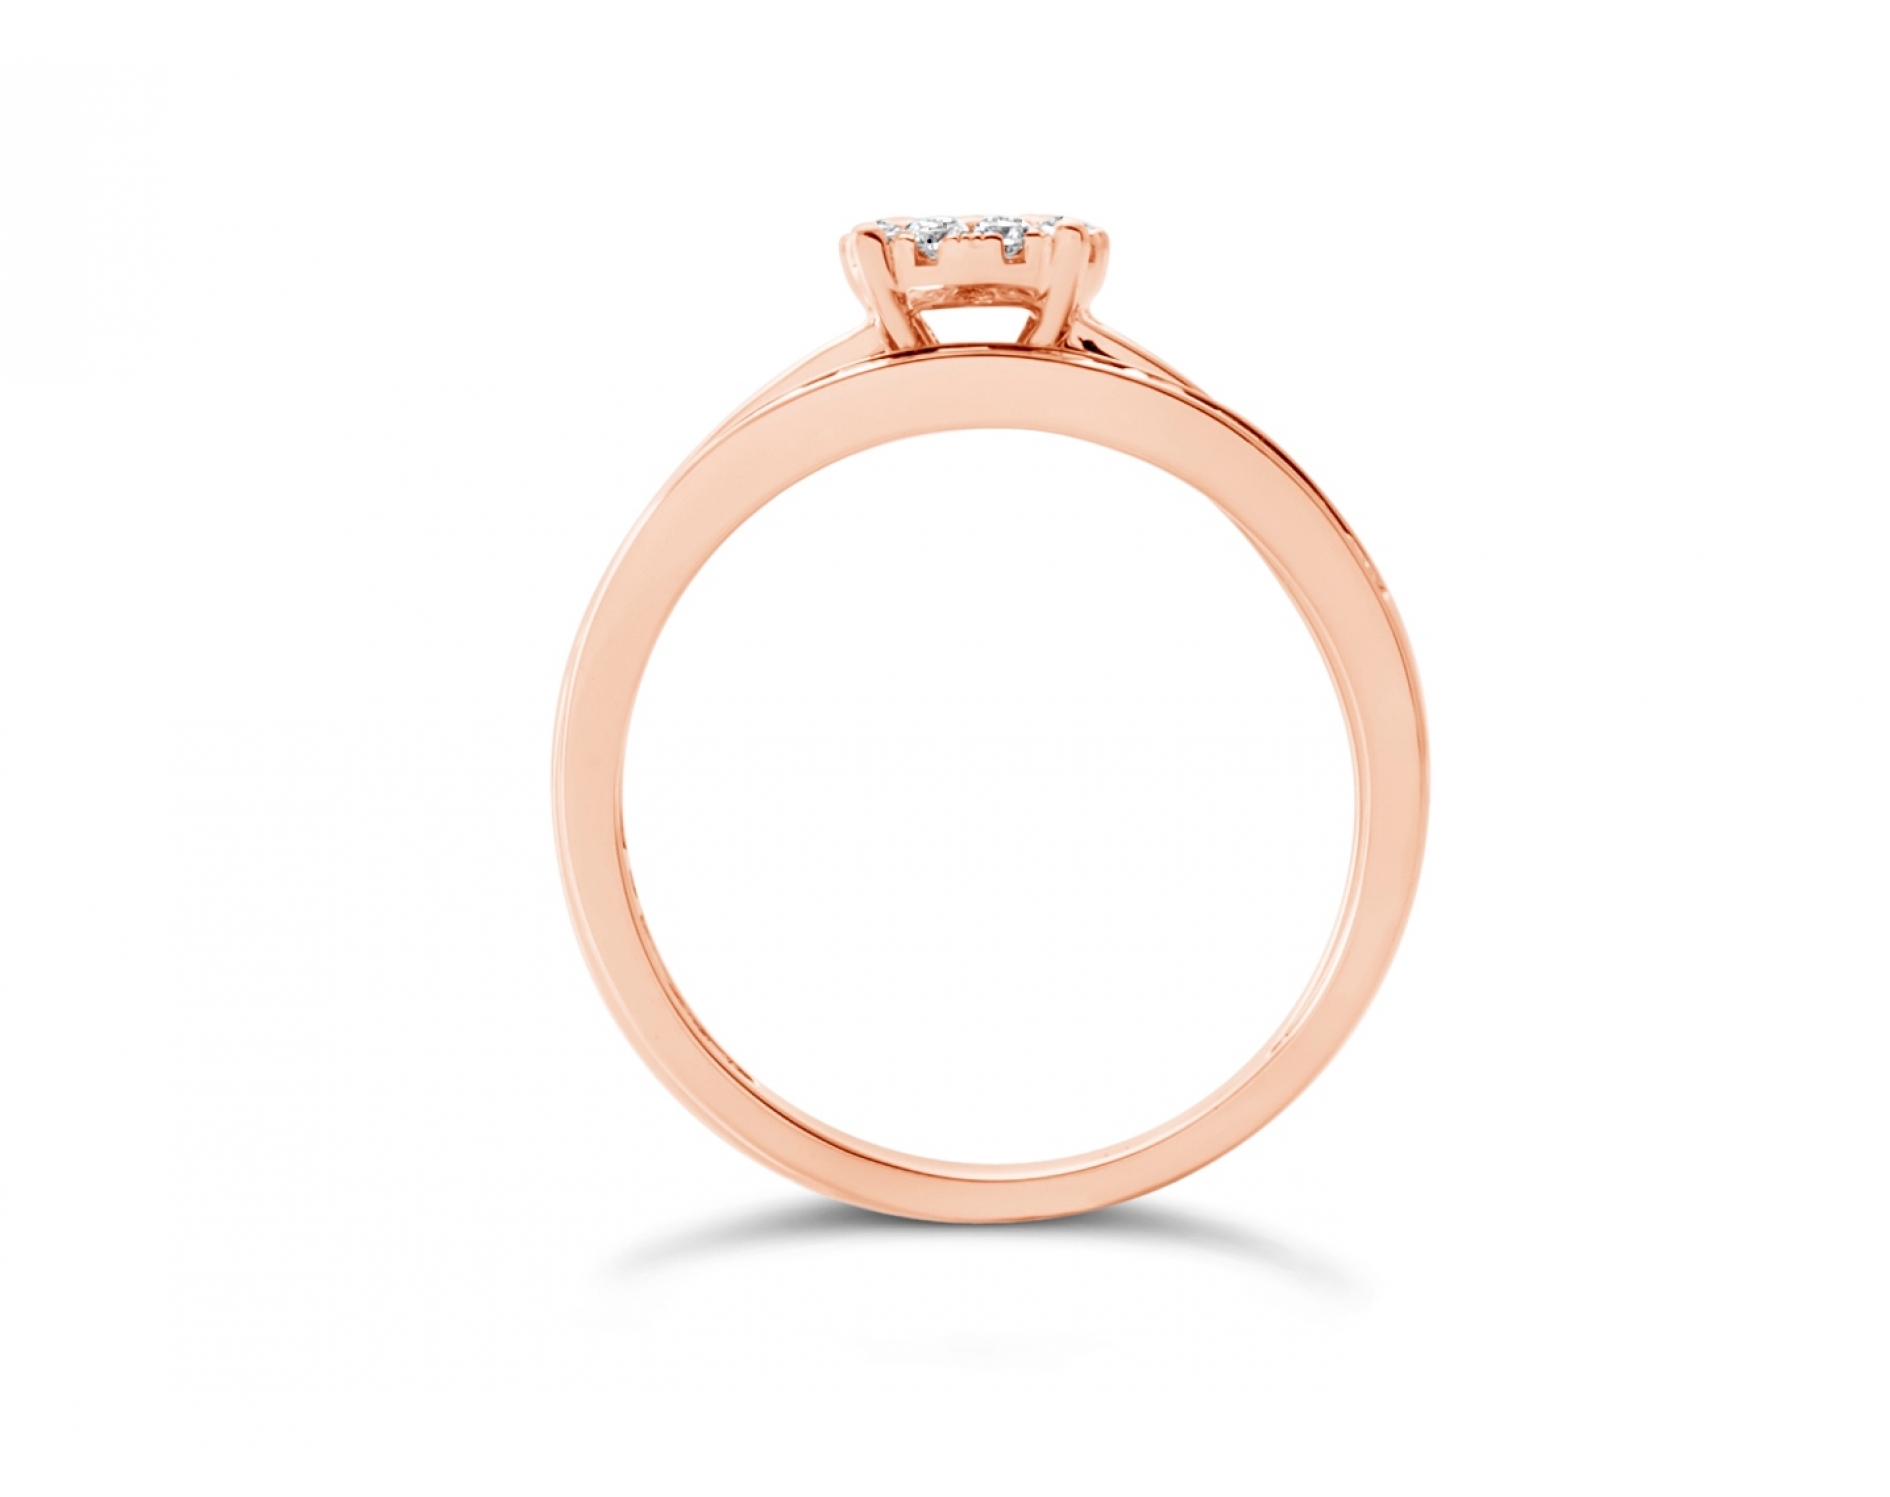 18k rose gold halo illusion set engagement ring & matching wedding band in channel set (2 rings)